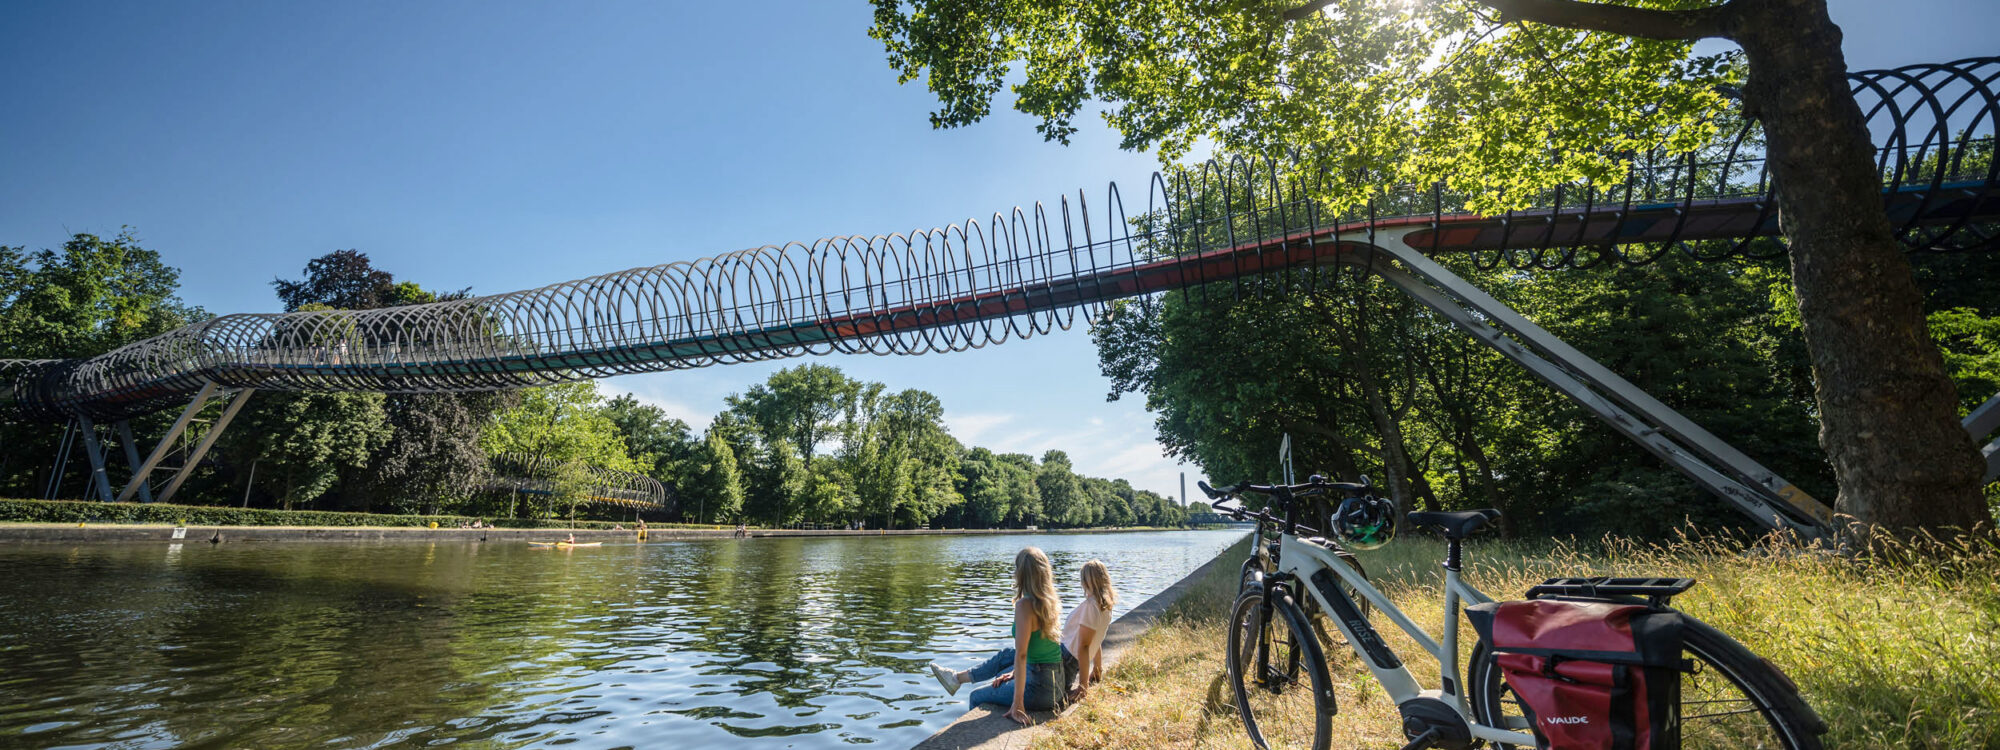 The photo shows two cyclists on the banks of the Rhein-Herne Canal in front of the Slinky Springs to Fame bridge in Oberhausen